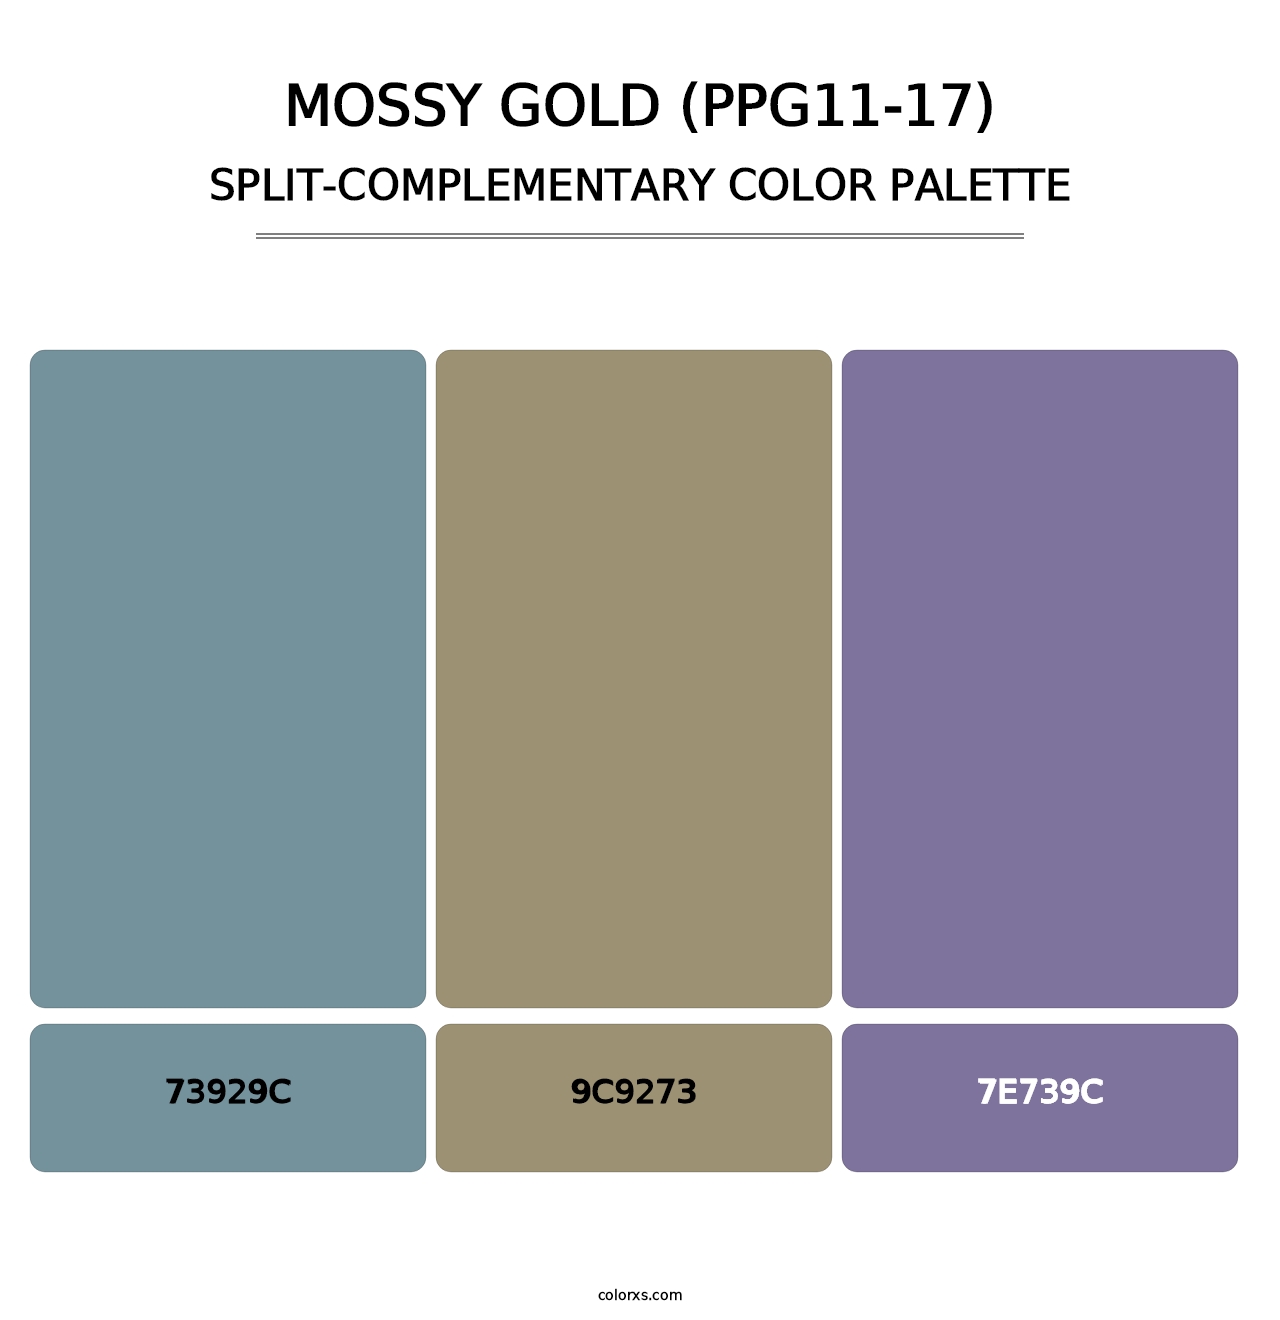 Mossy Gold (PPG11-17) - Split-Complementary Color Palette